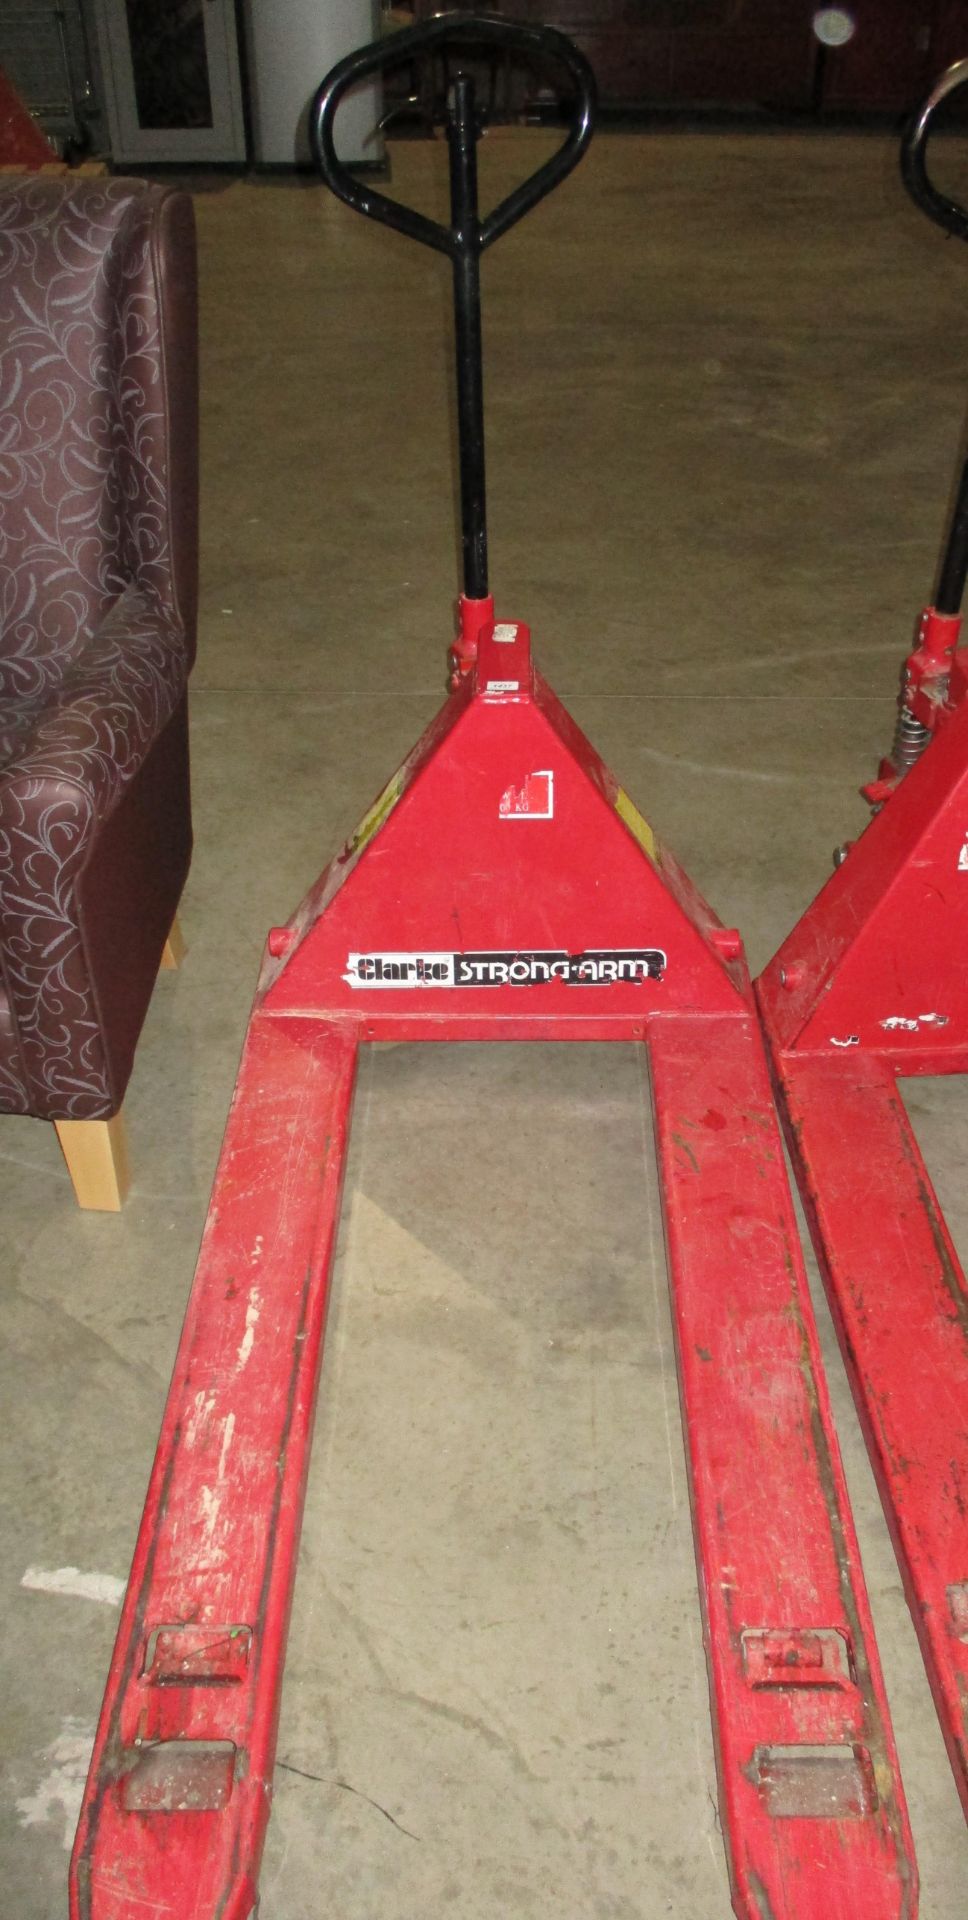 A Clarke Strong Arm red metal pallet truck